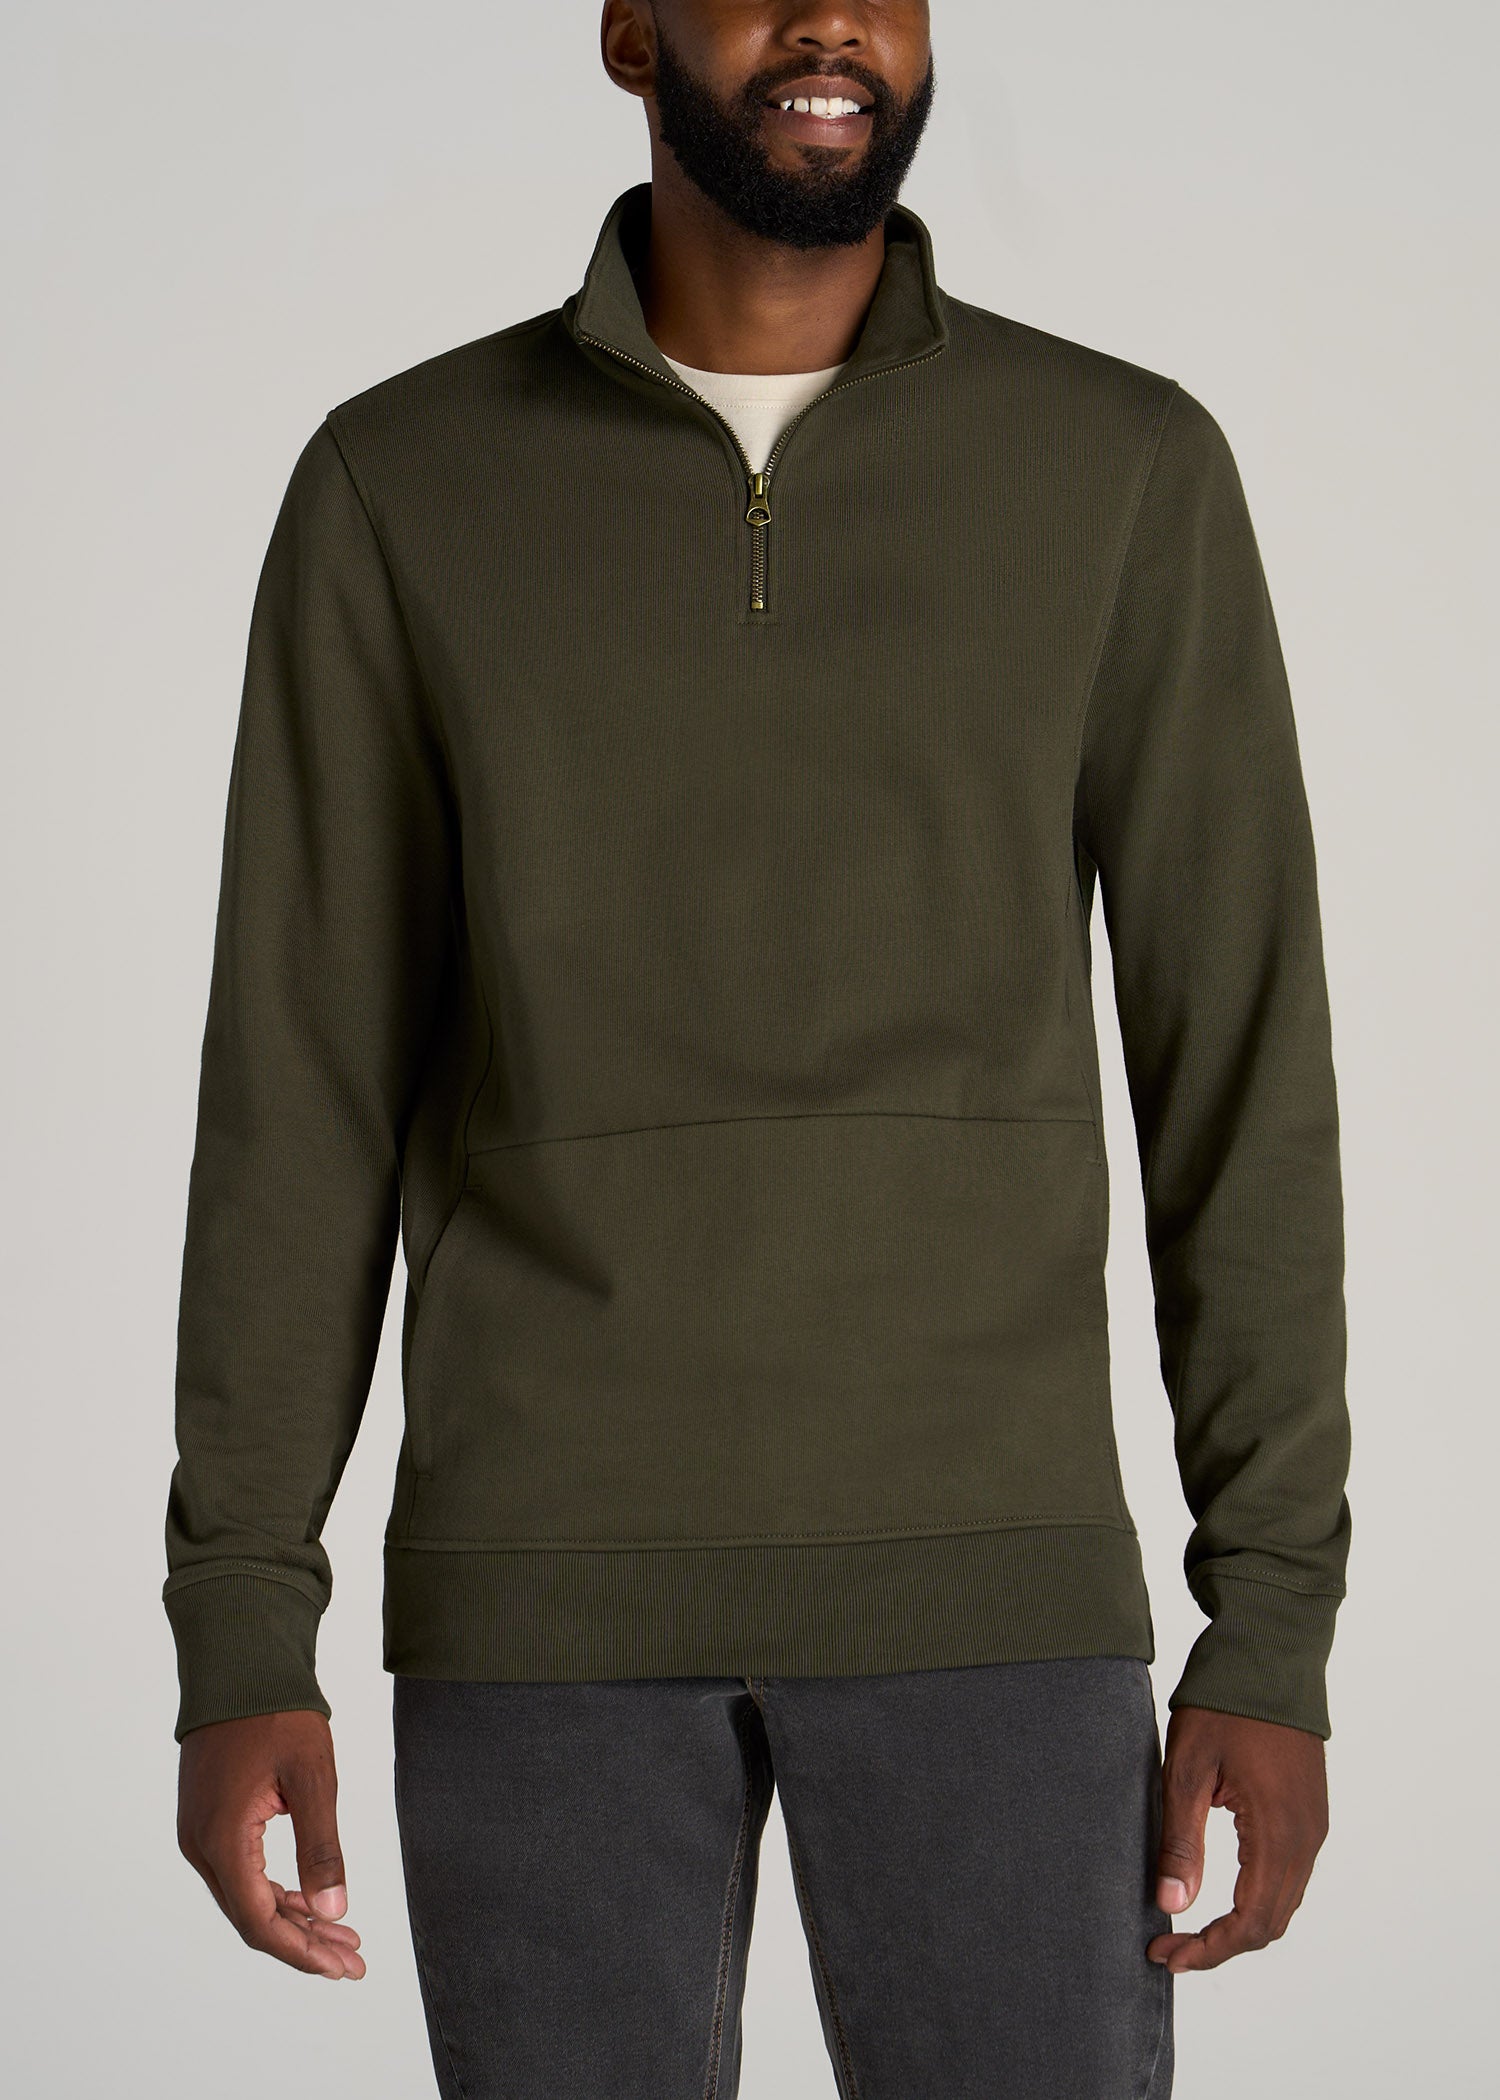 LJ&S Mens Tall French Terry Quarter Zip Pullover Vintage Thyme Green –  American Tall